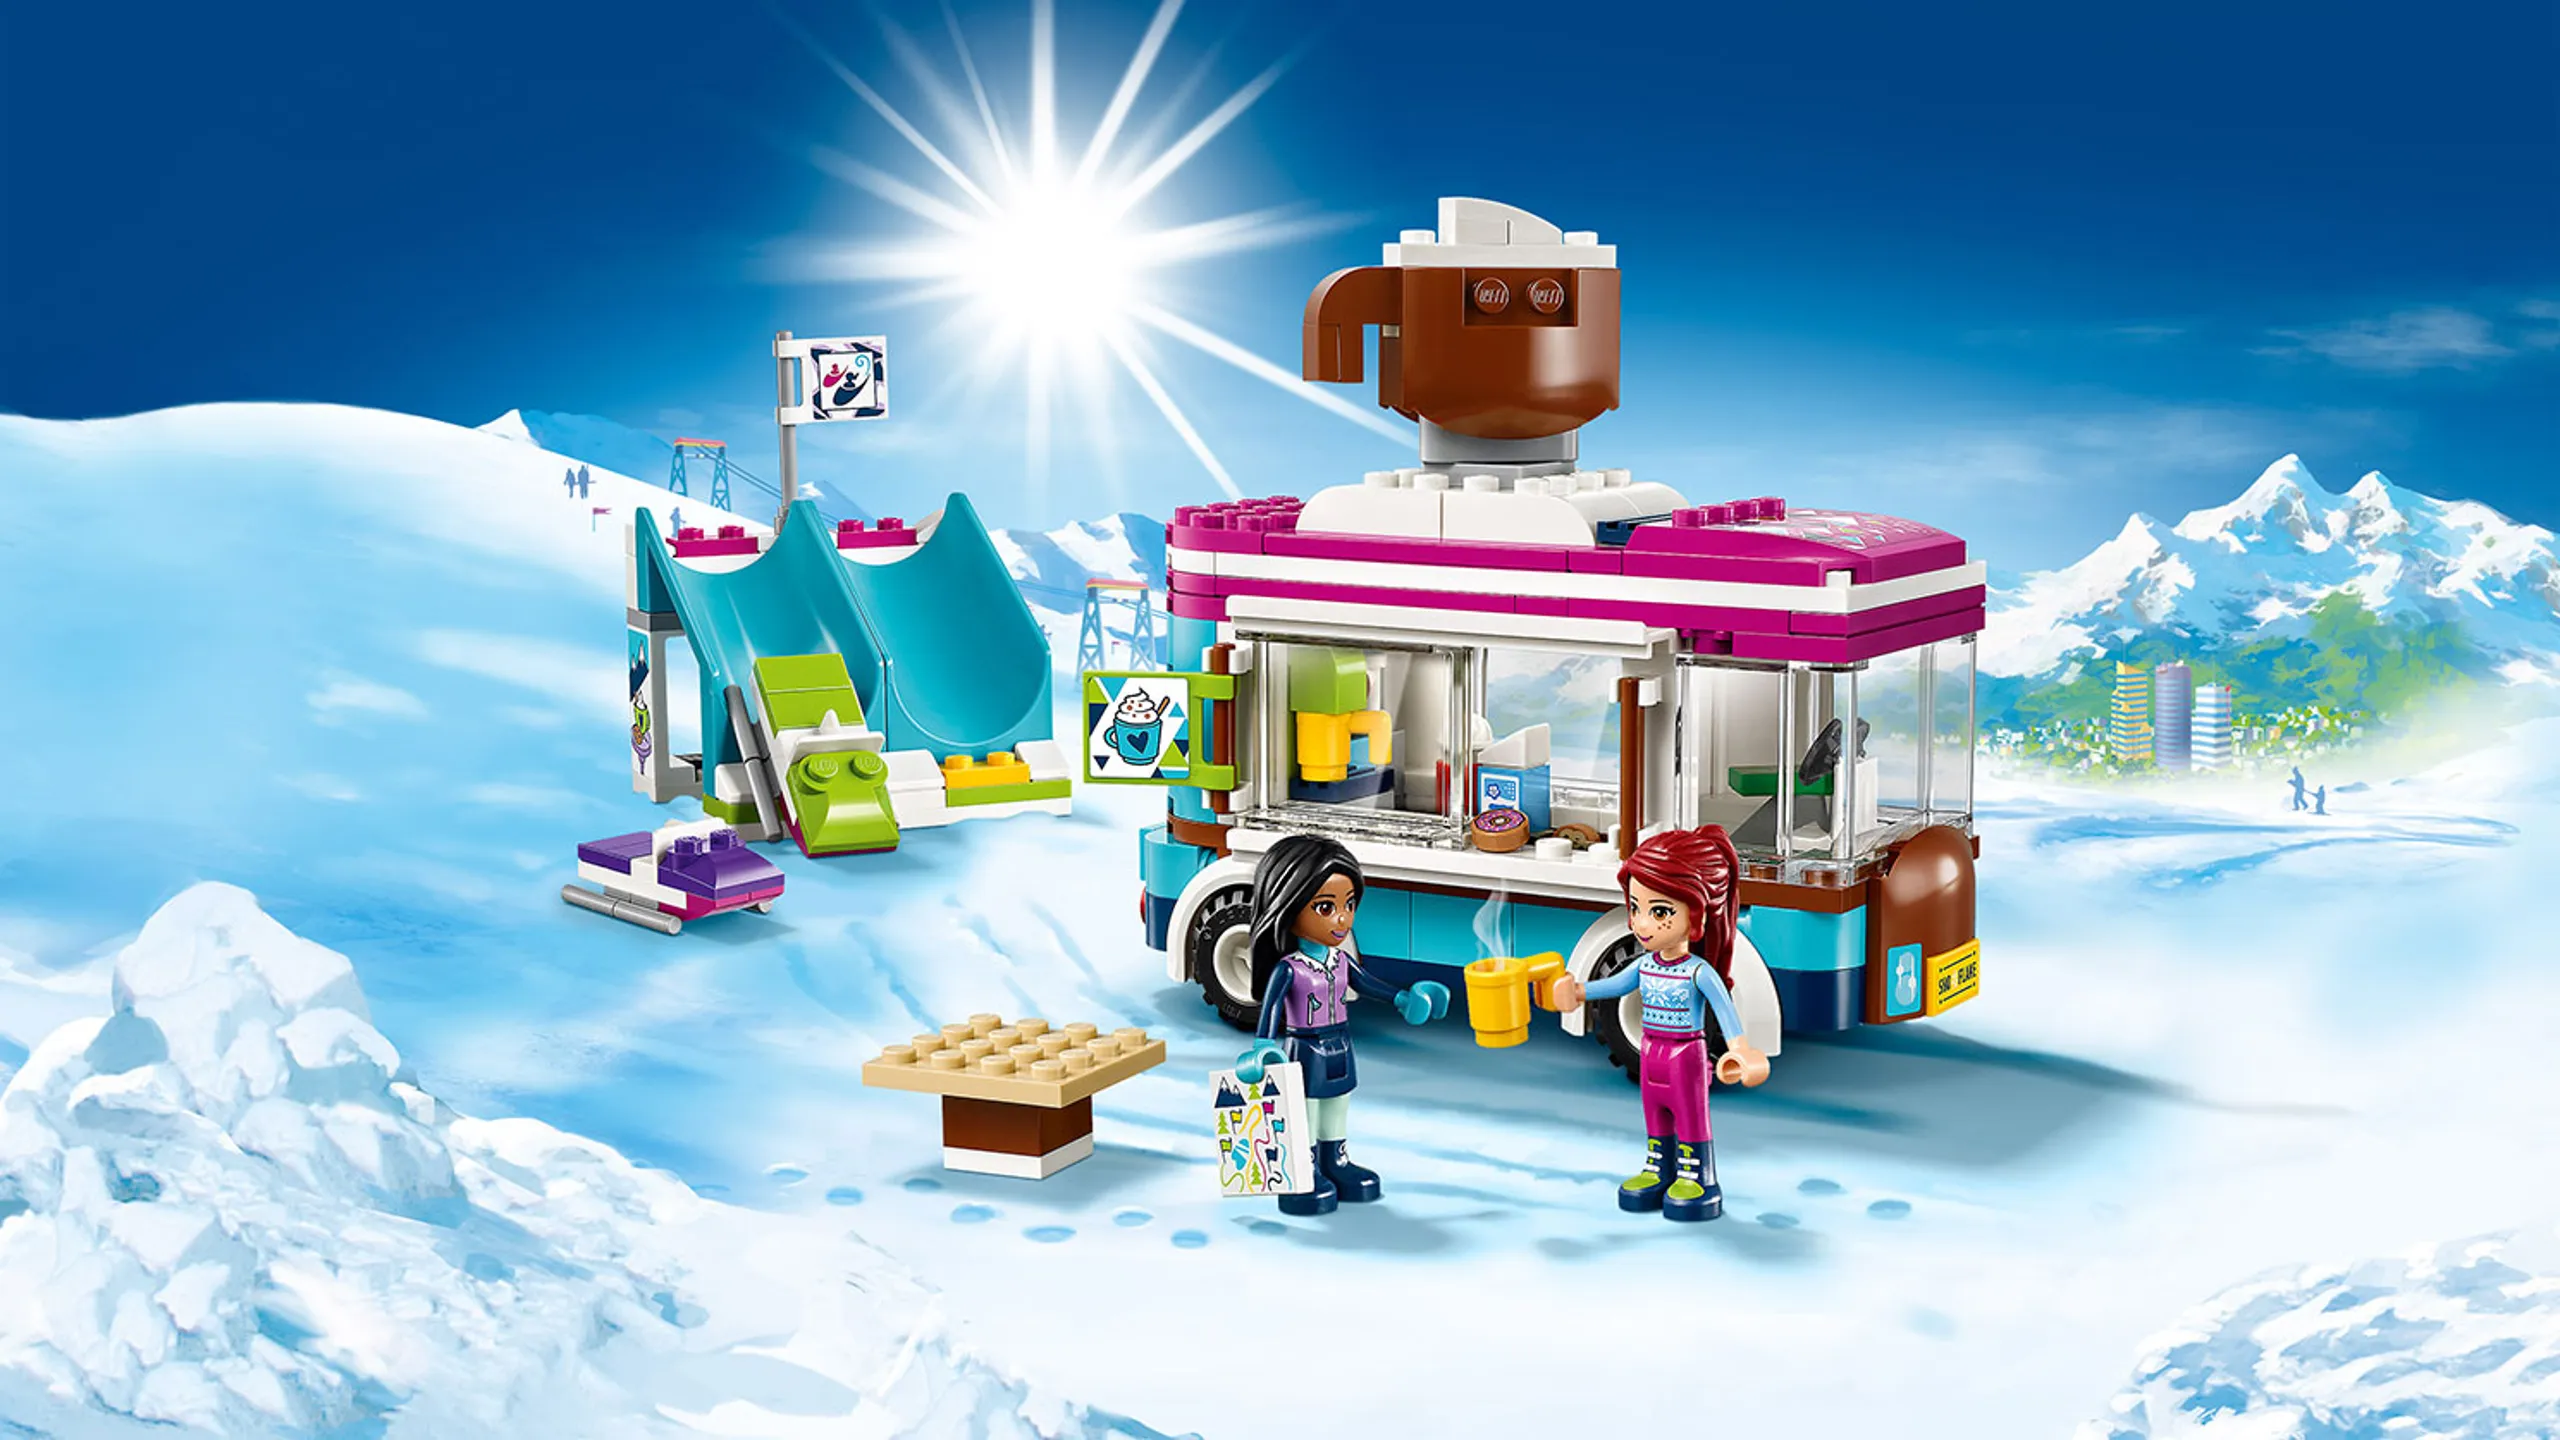 LEGO Friends - 41319 Snow Resort Hot Chocolate Van - Stay warm in the snow with a cup of hot chocolate from the Hot Chocolate Van and take a sledging race on the slide.